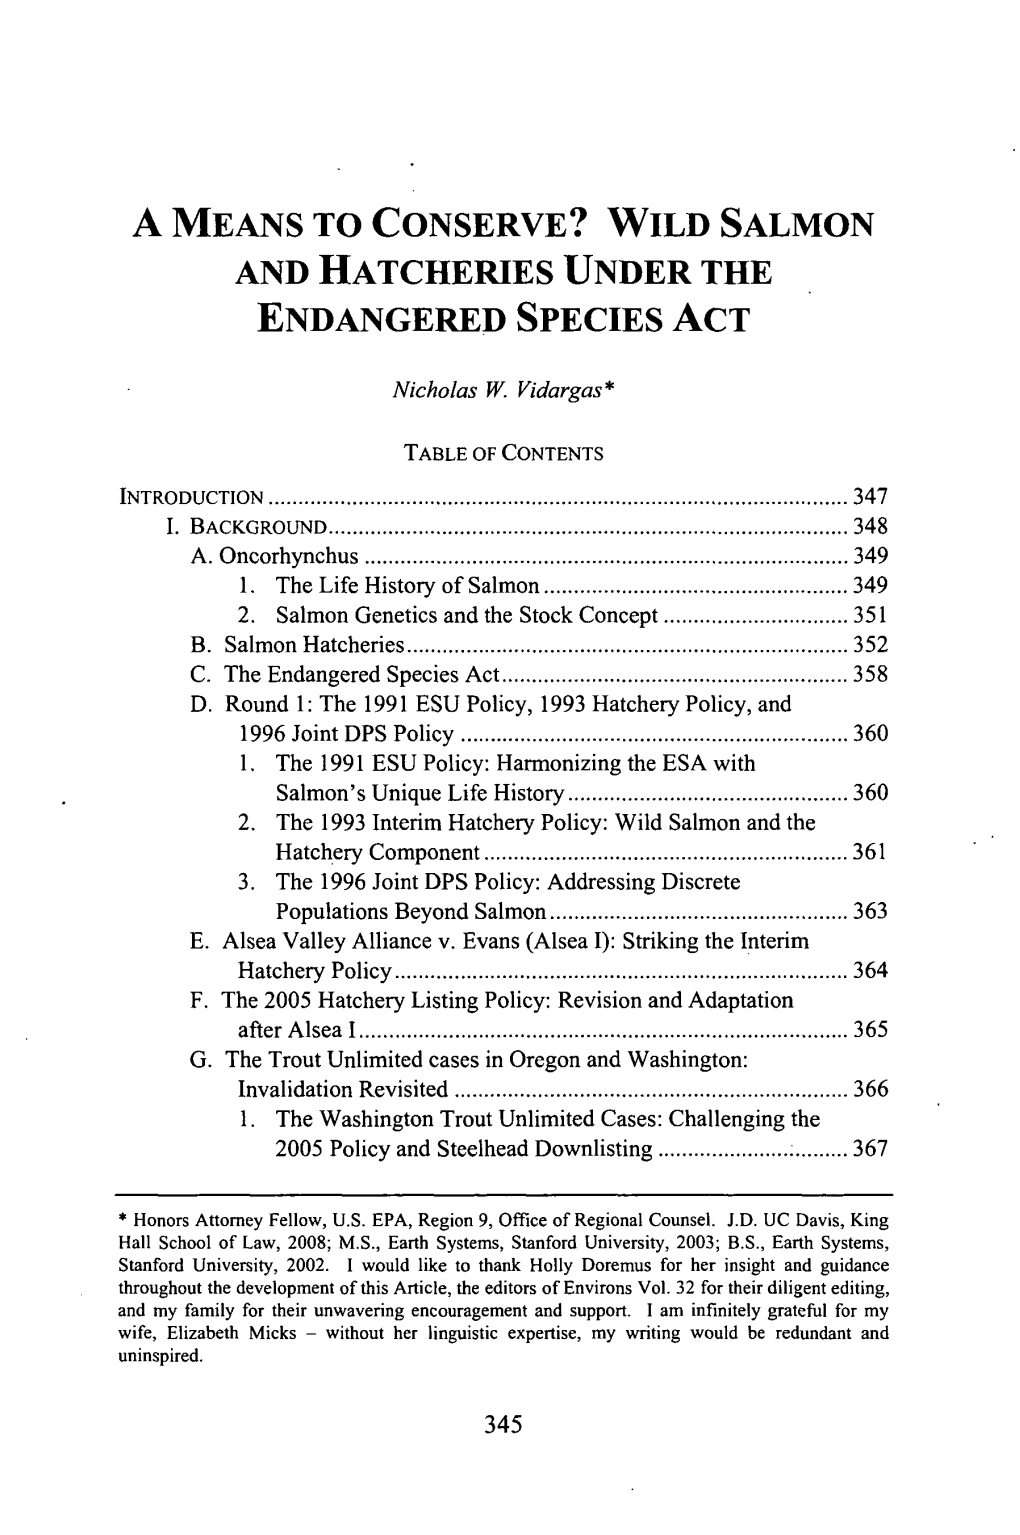 Wild Salmon and Hatcheries Under the Endangered Species Act, A